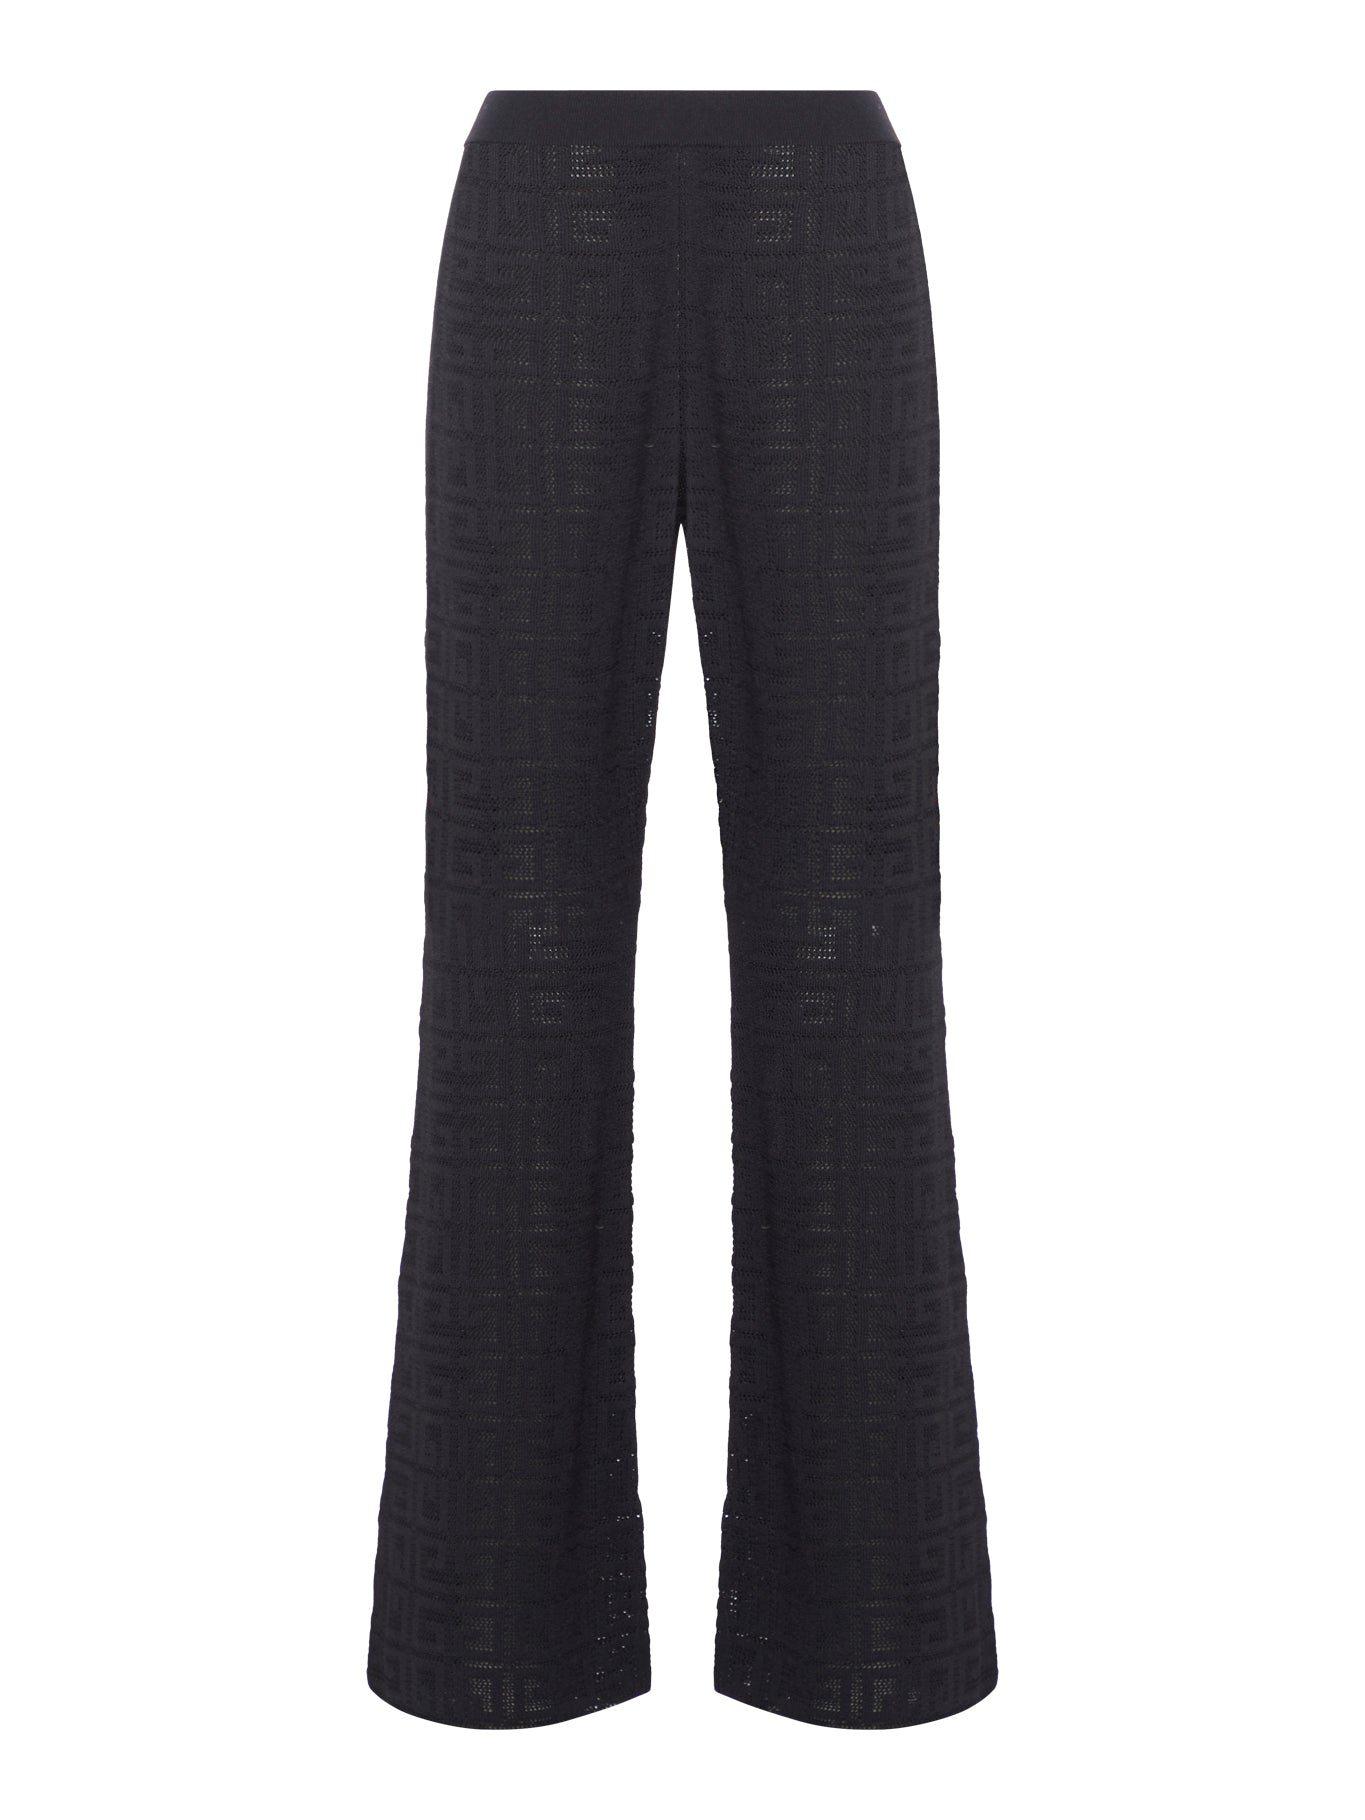 Flare pants in 4G jacquard